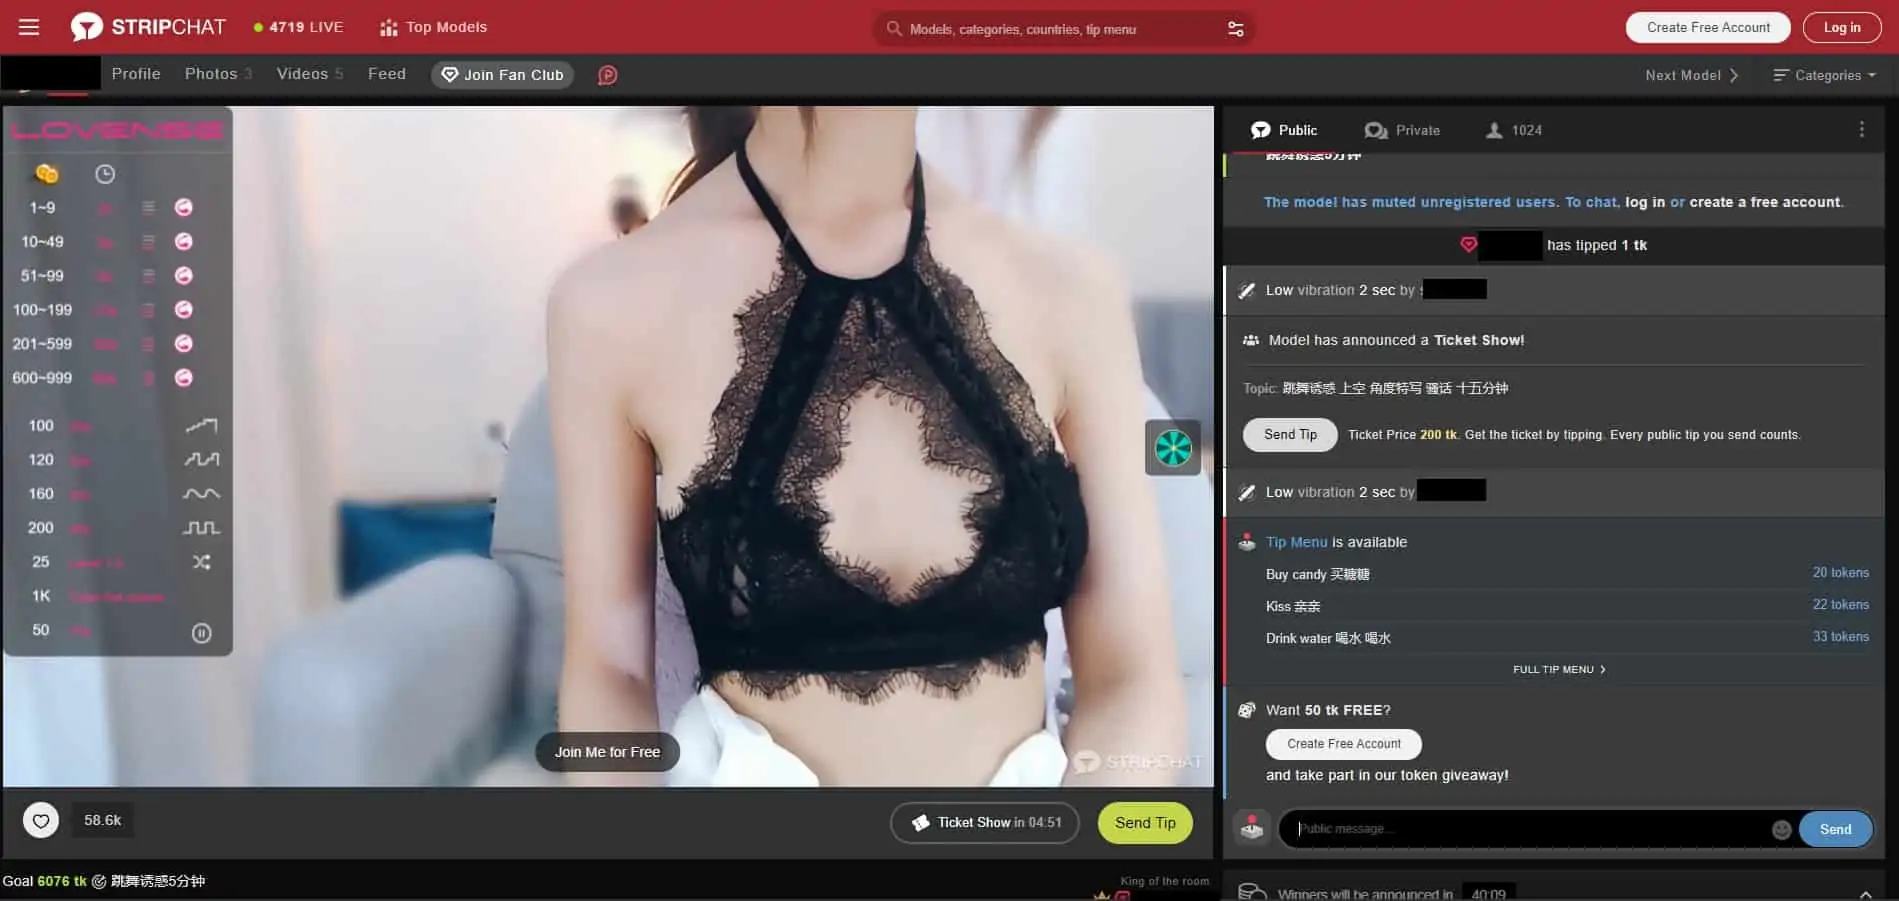 Sex cam site Stripchat exposes user, model info on the web: report -  Comparitech